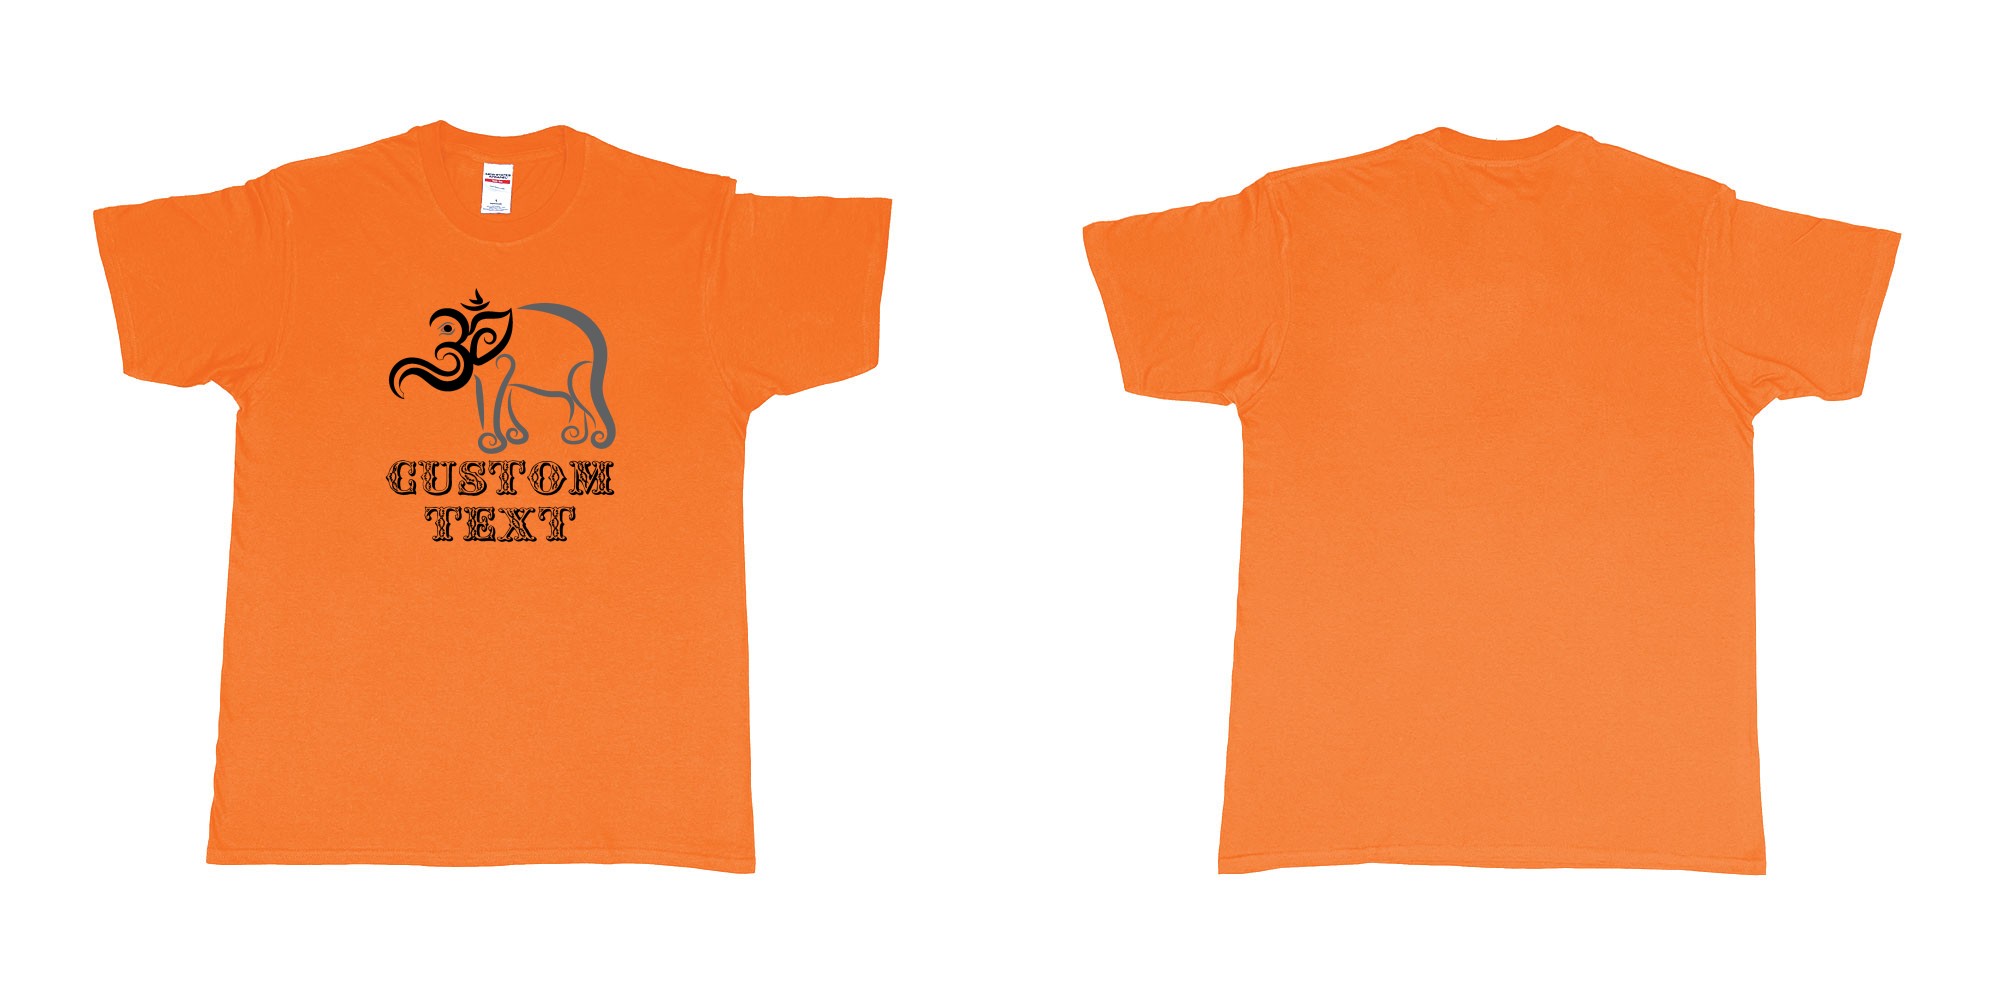 Custom tshirt design om elephant design in fabric color orange choice your own text made in Bali by The Pirate Way